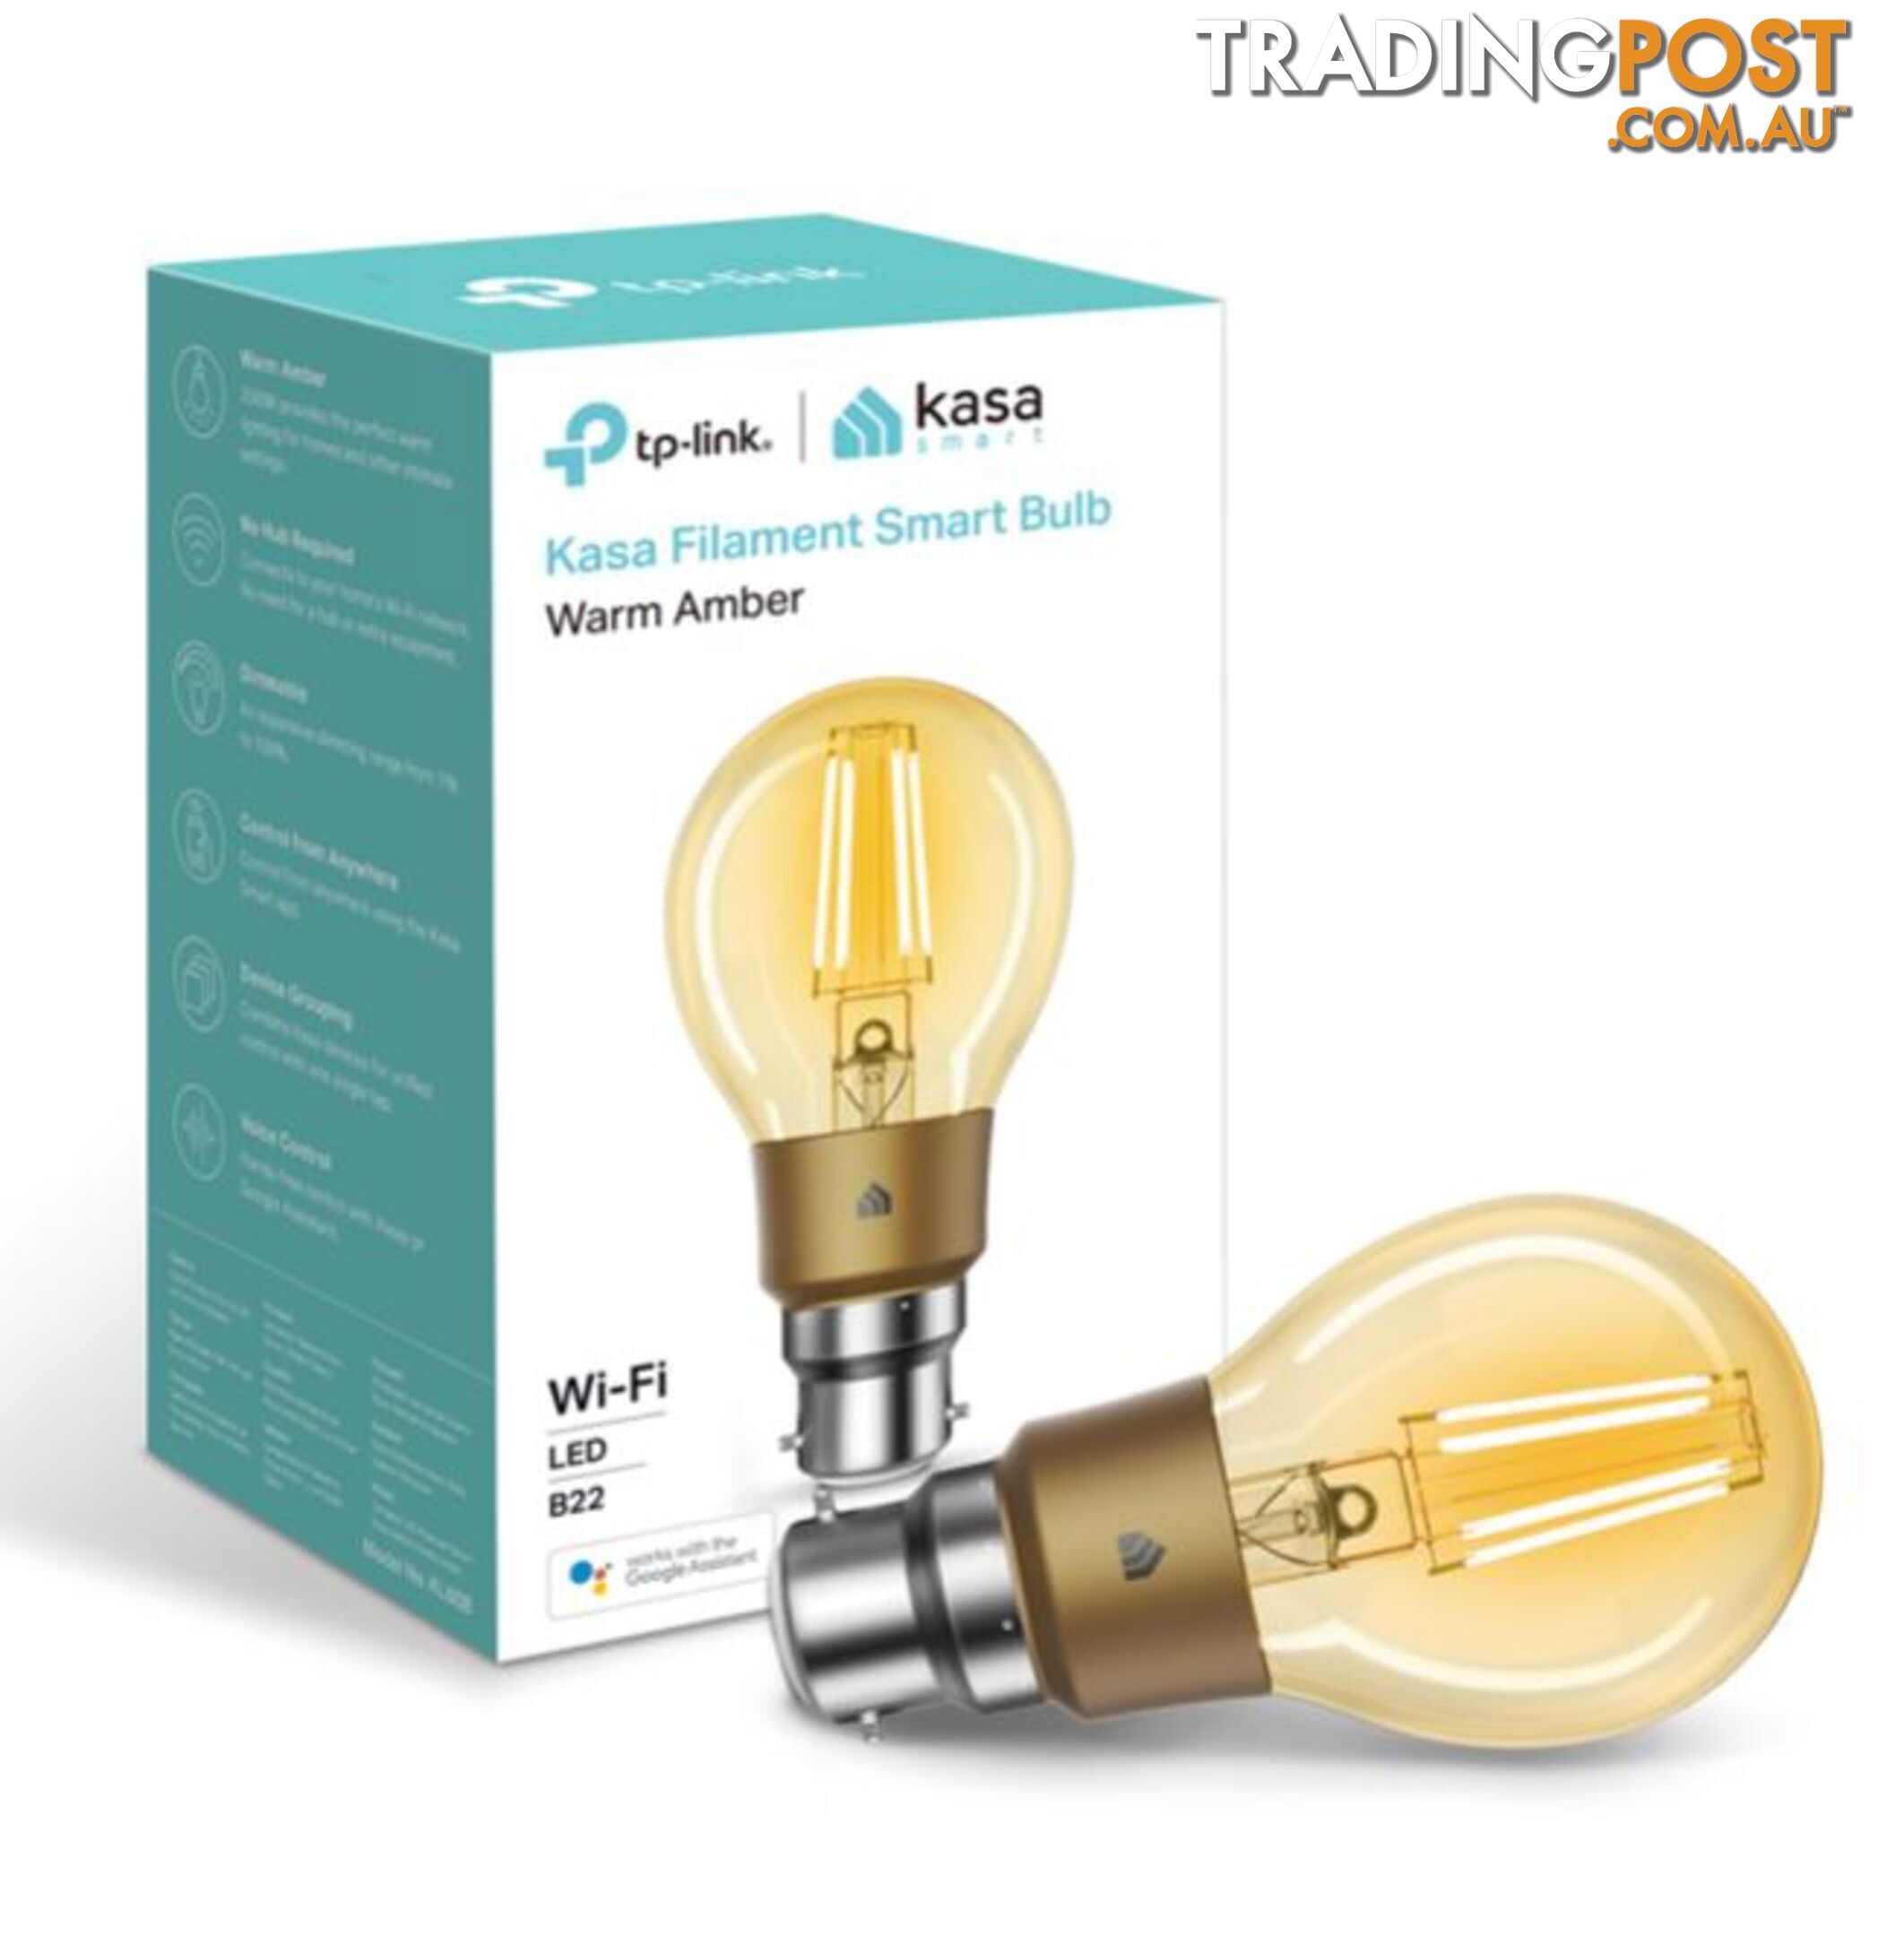 TP-Link KL60B Kasa Filament Smart Bulb, Warm Amber, Bayonet, Dimmable, No Hub Required, Voice Control, 2000K, 5kWh/1000h, 2.4 GHz, 2 Year Warranty - HETL-KL60B